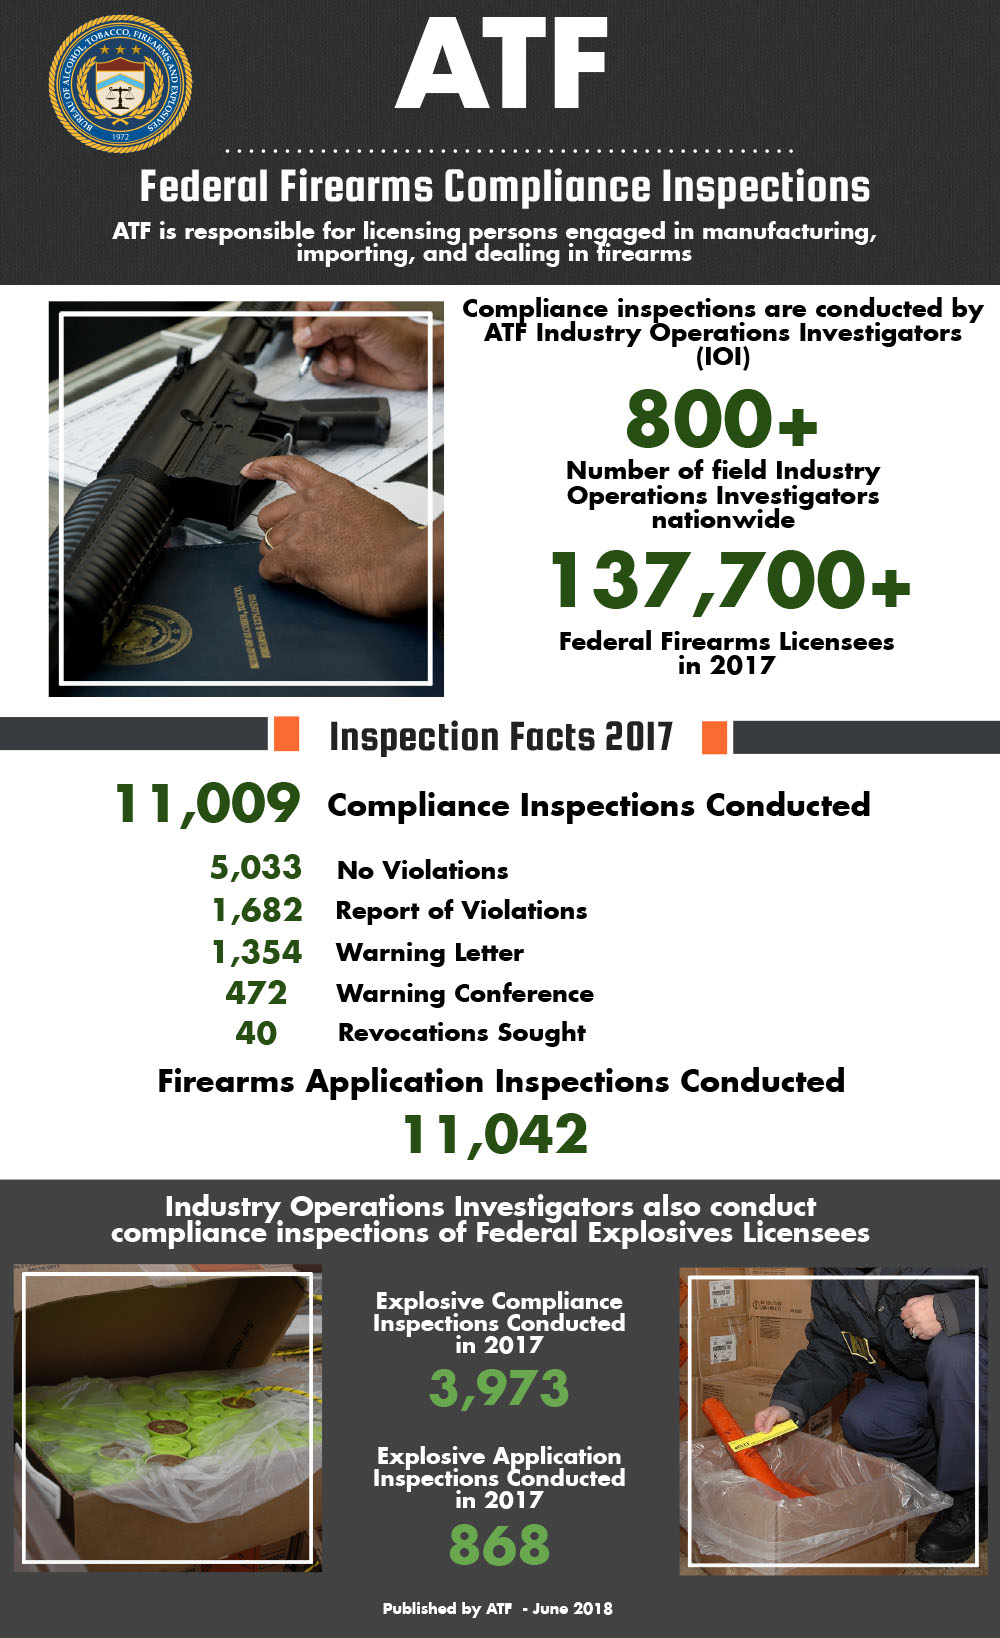 Fiscal Year 2015 FFL Inspections